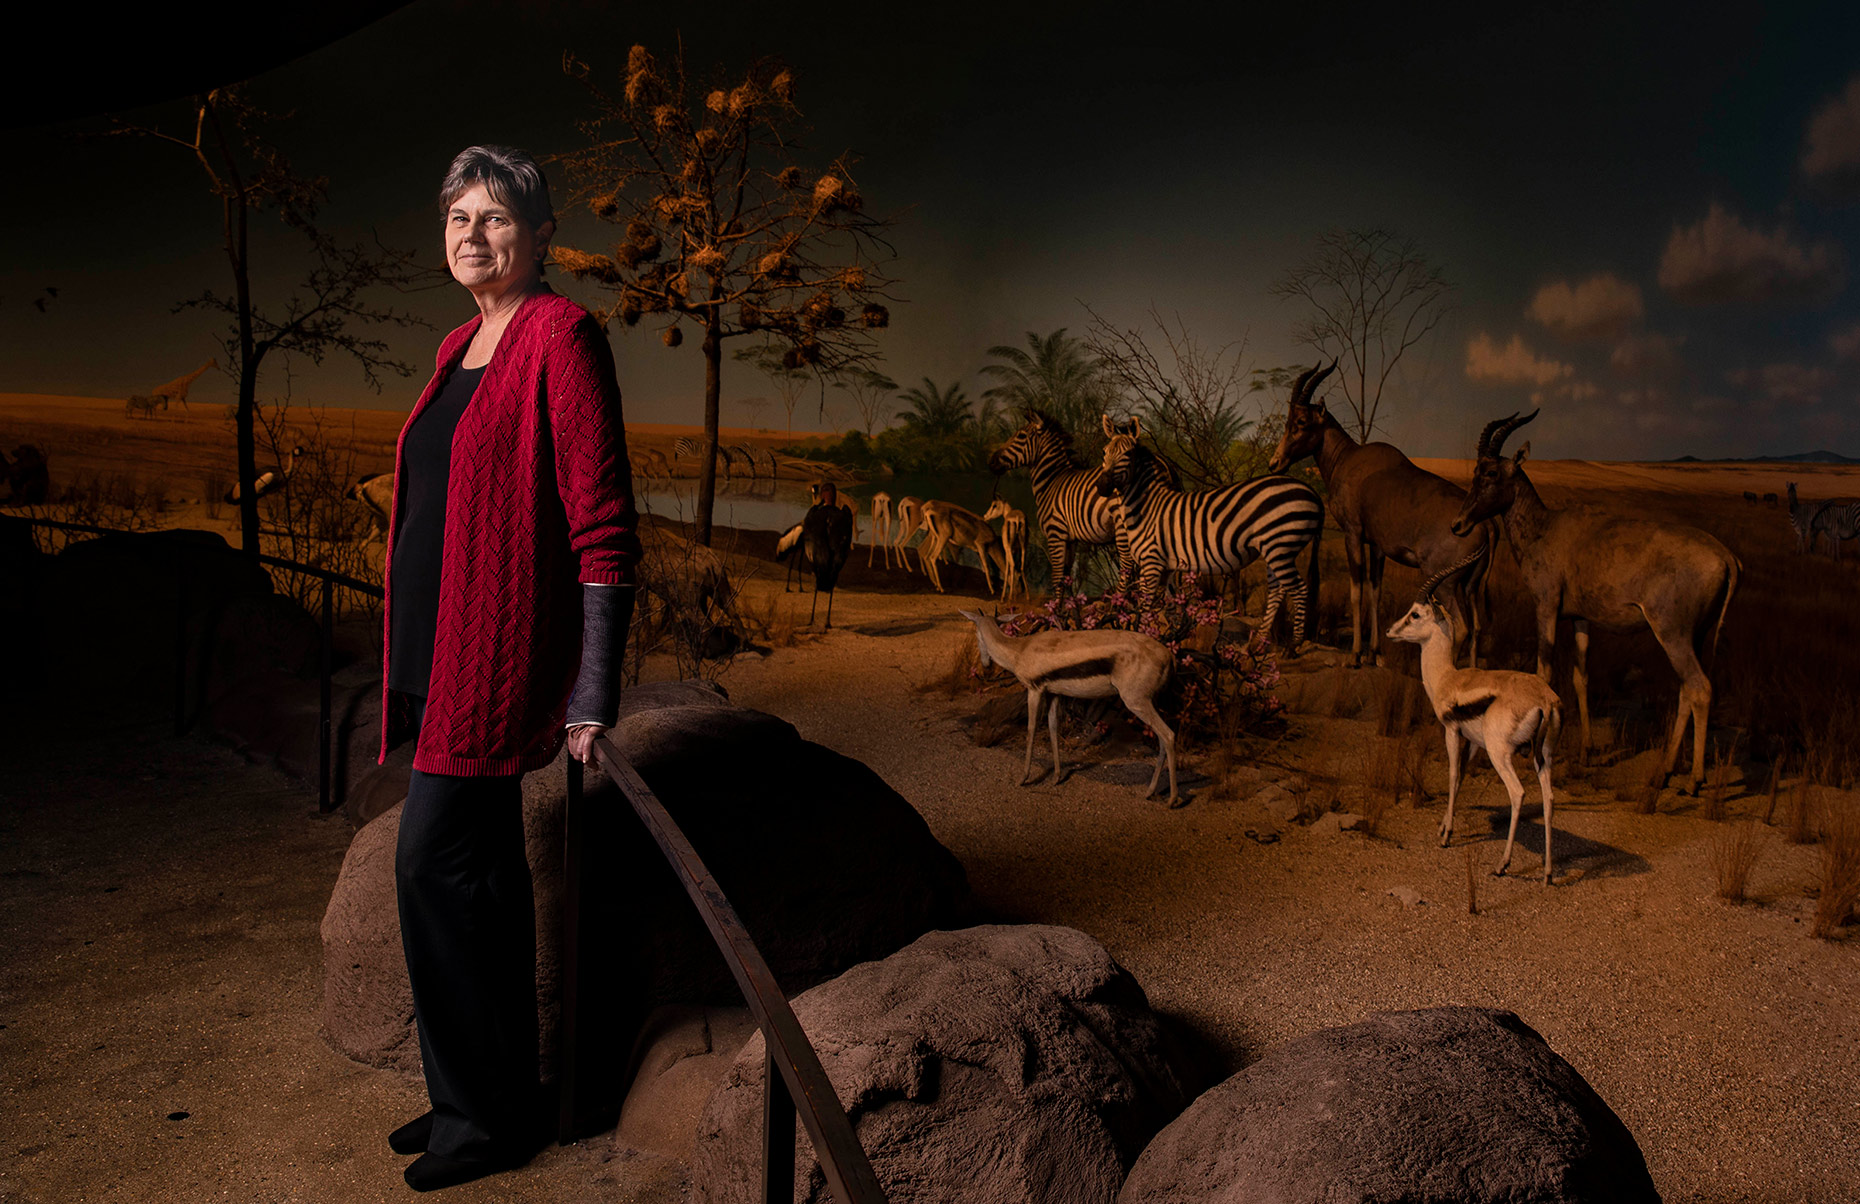 editorial photographer Milwaukee - Dr. Ellen Censky, director of the Milwaukee Public Museum, photographed in an exhibit